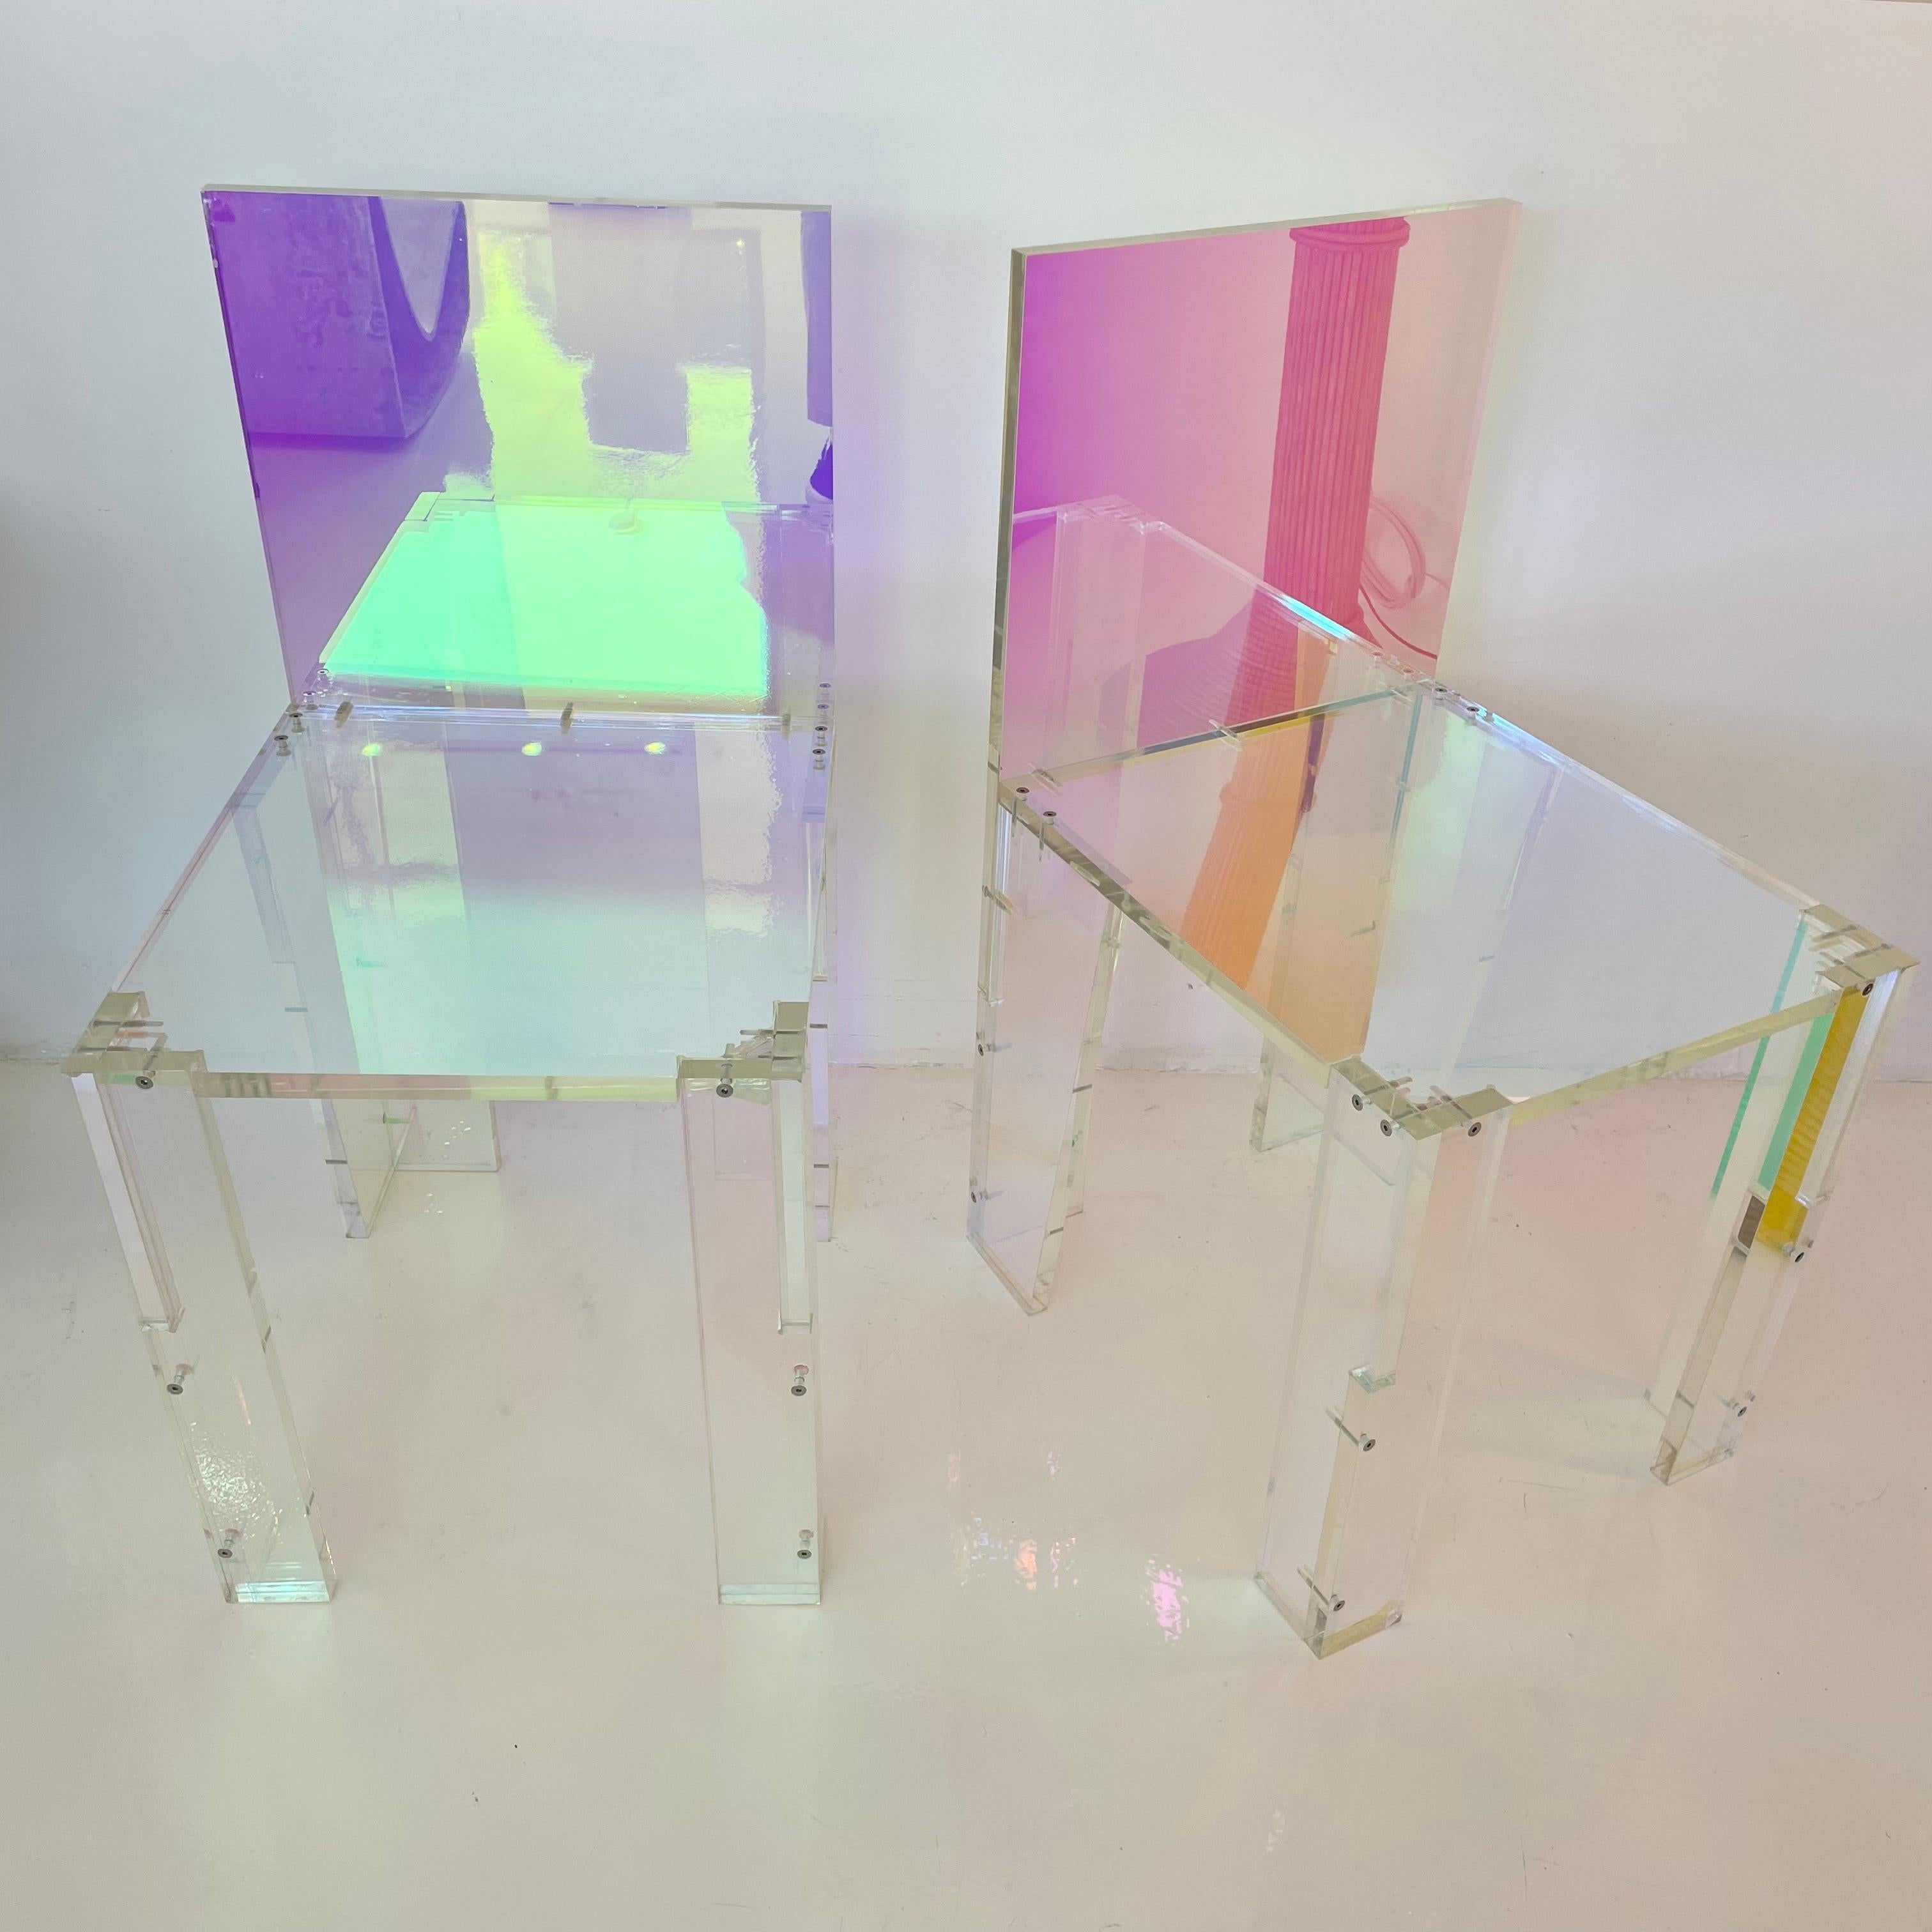 Pair of sculptural acrylic chairs made by Diogo and Juliette Felippelli. They founded Joogii in 2015 to create objects and art that cultivate a vibrant environment with the intention to bring story, energy and dialogue into the global design